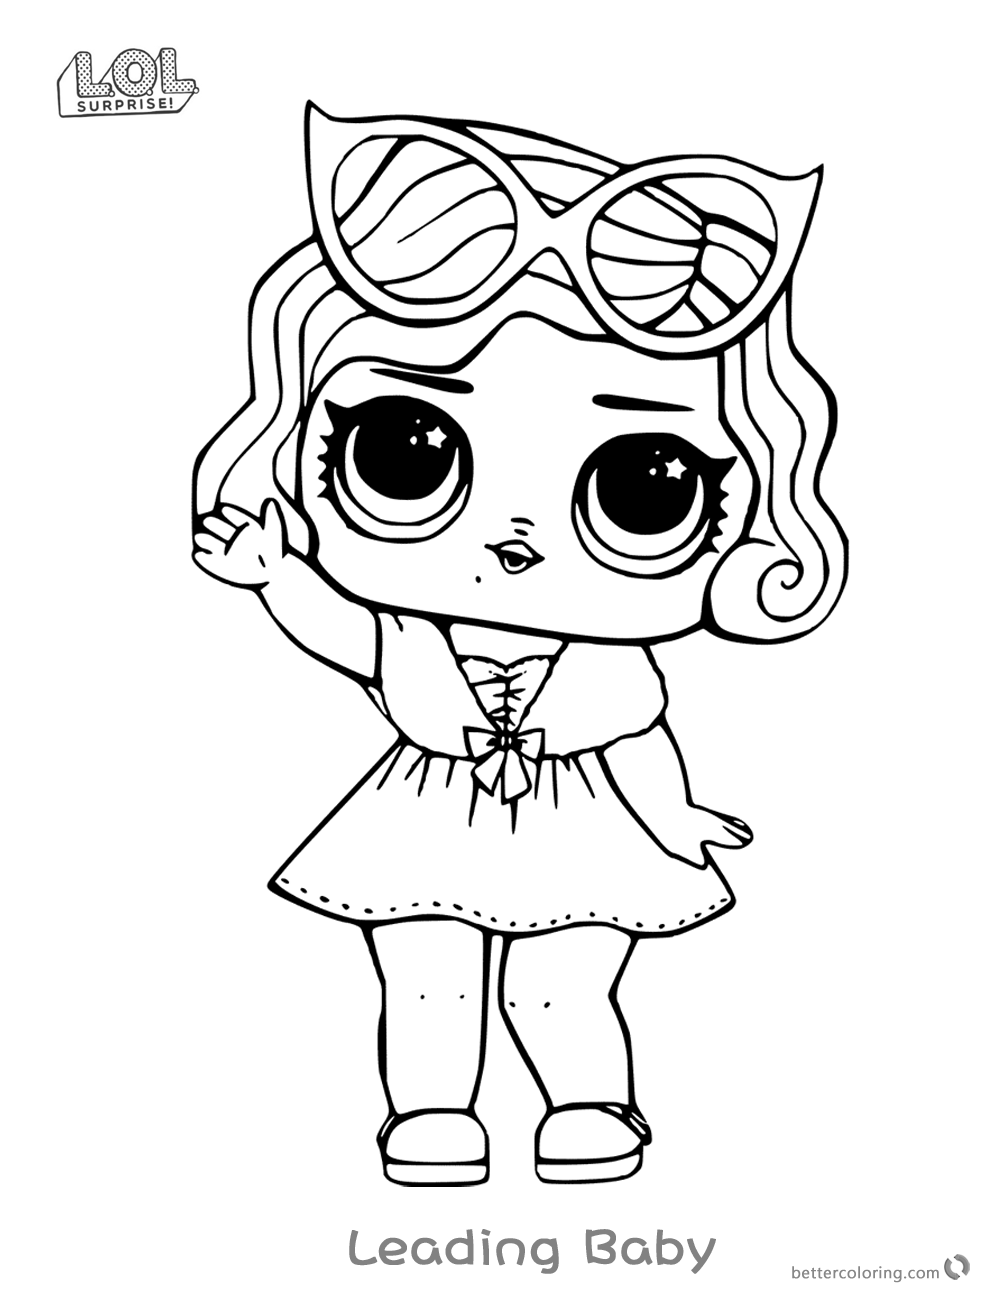 Leading Baby from LOL Surprise Doll Coloring Pages - Free ...